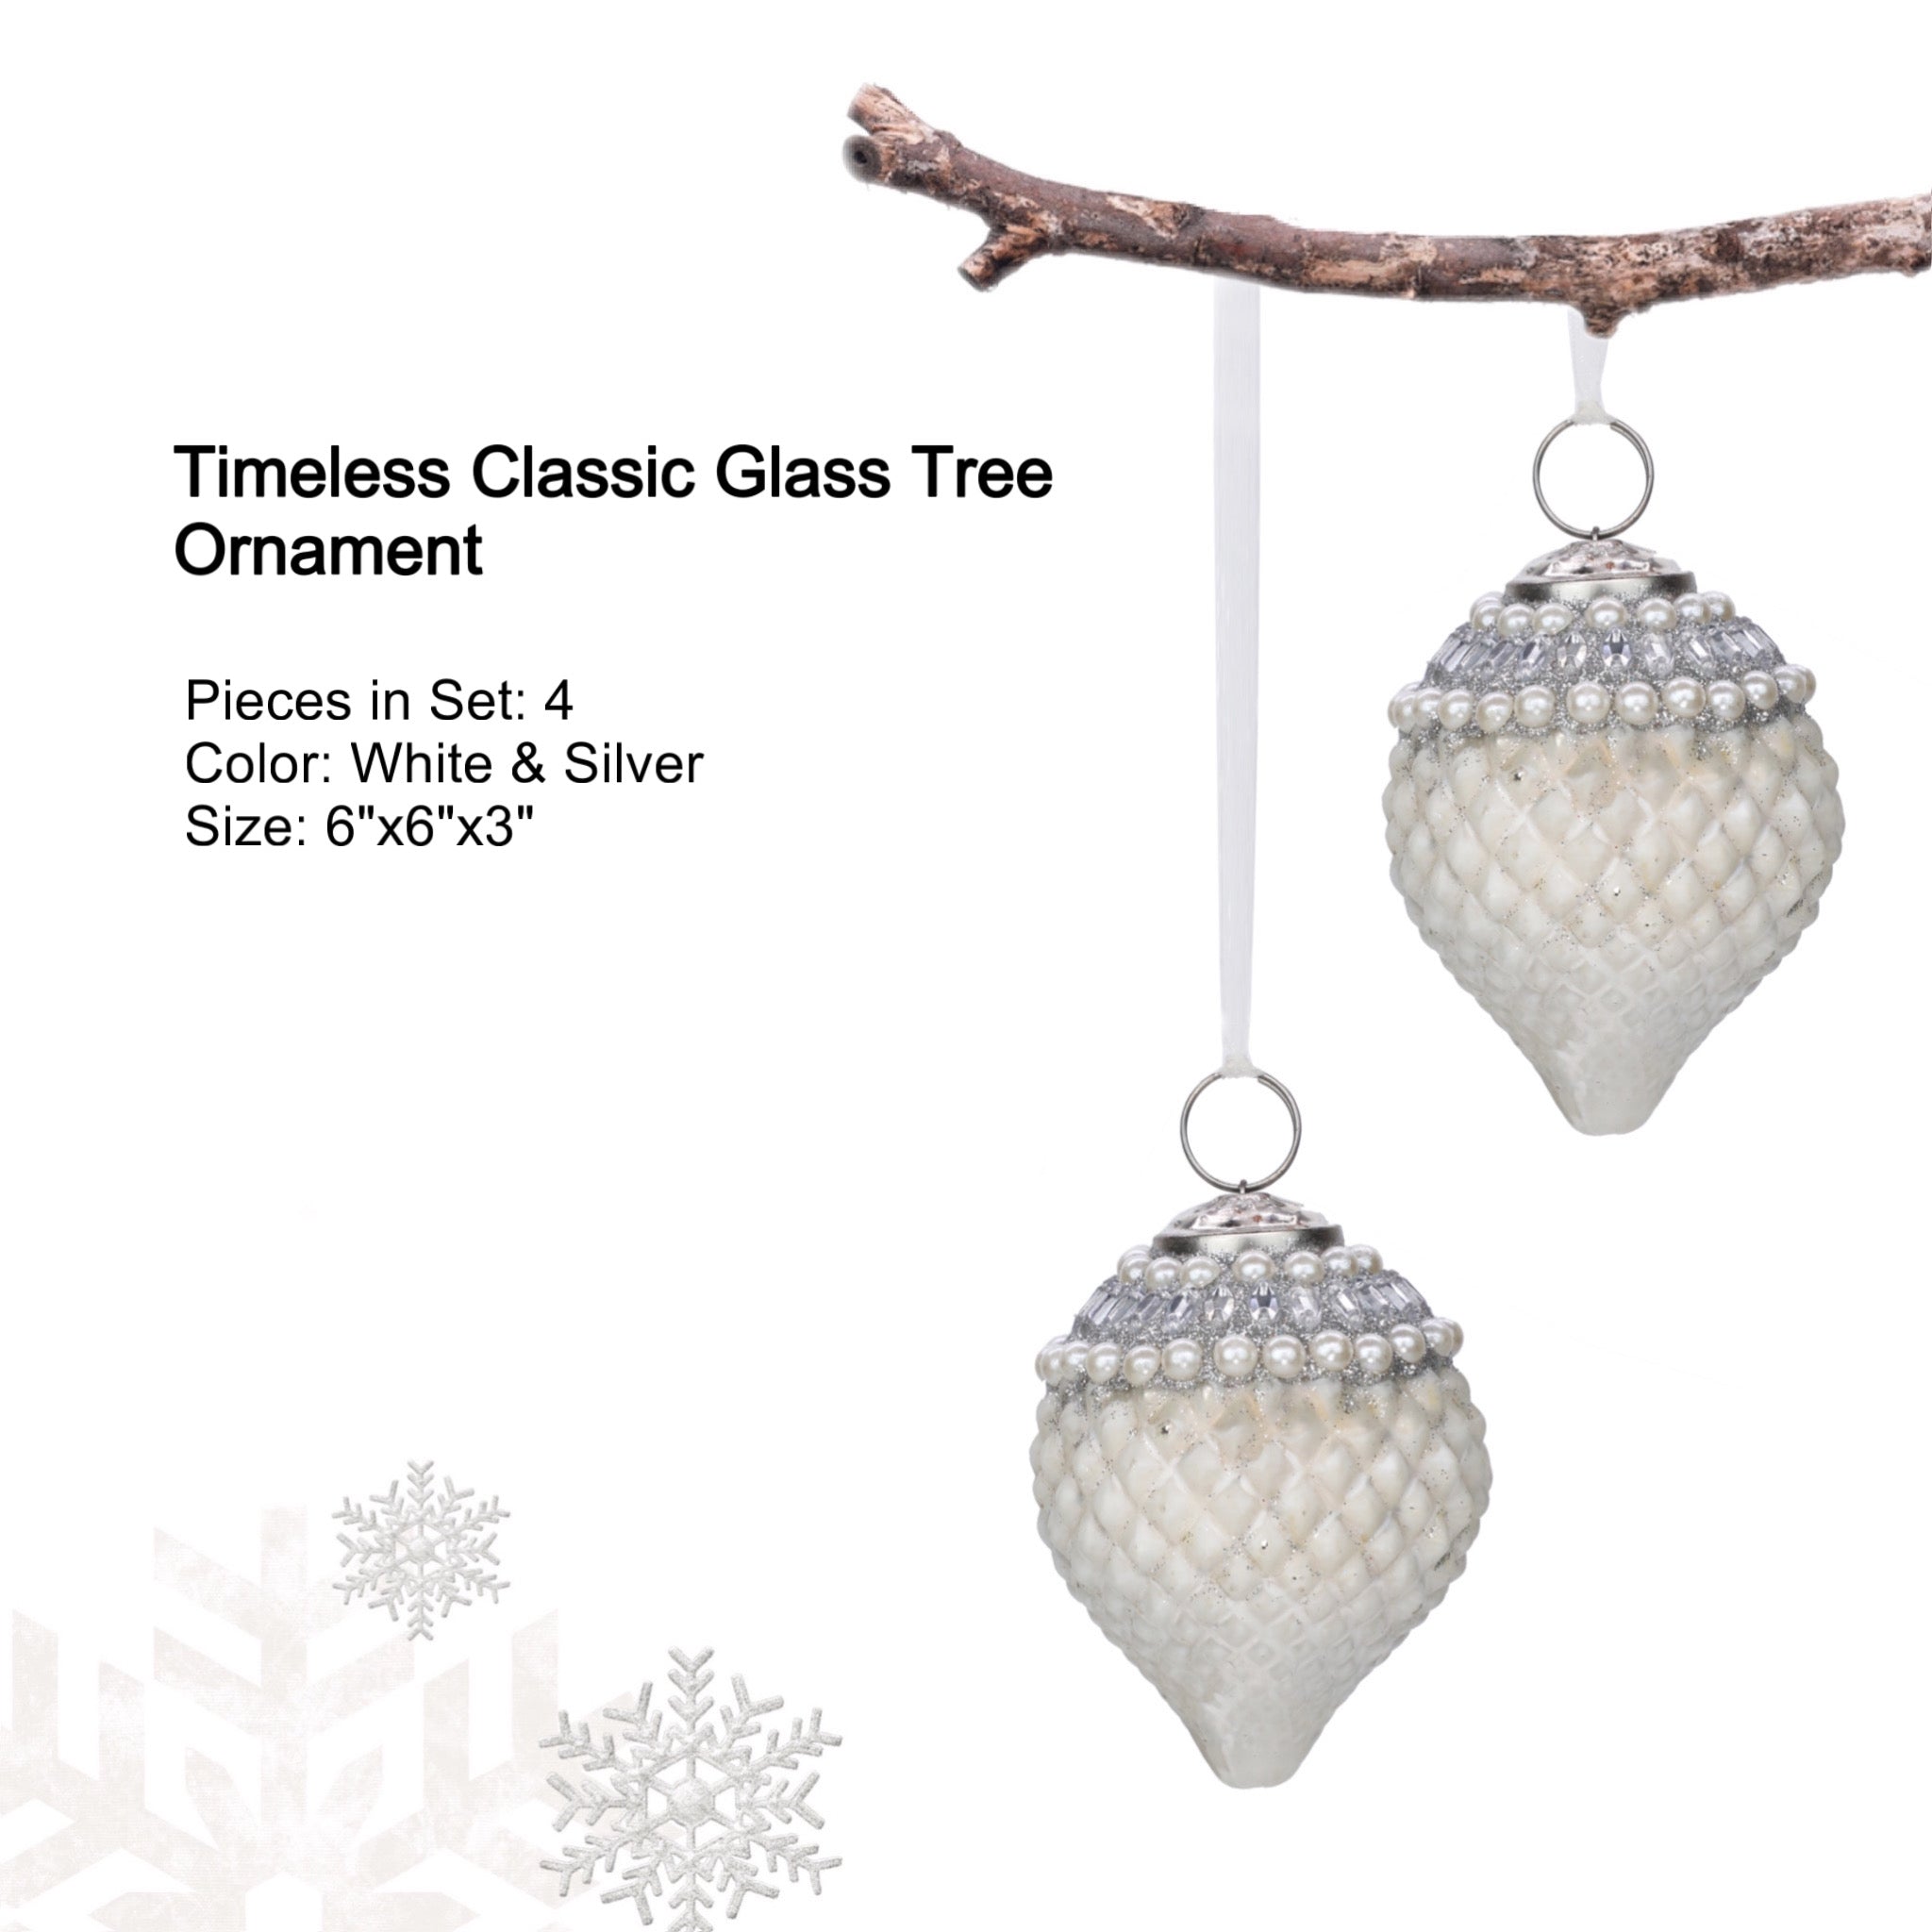 Timeless Classic Glass Tree Ornament in White & Silver, Boxed Set of 4